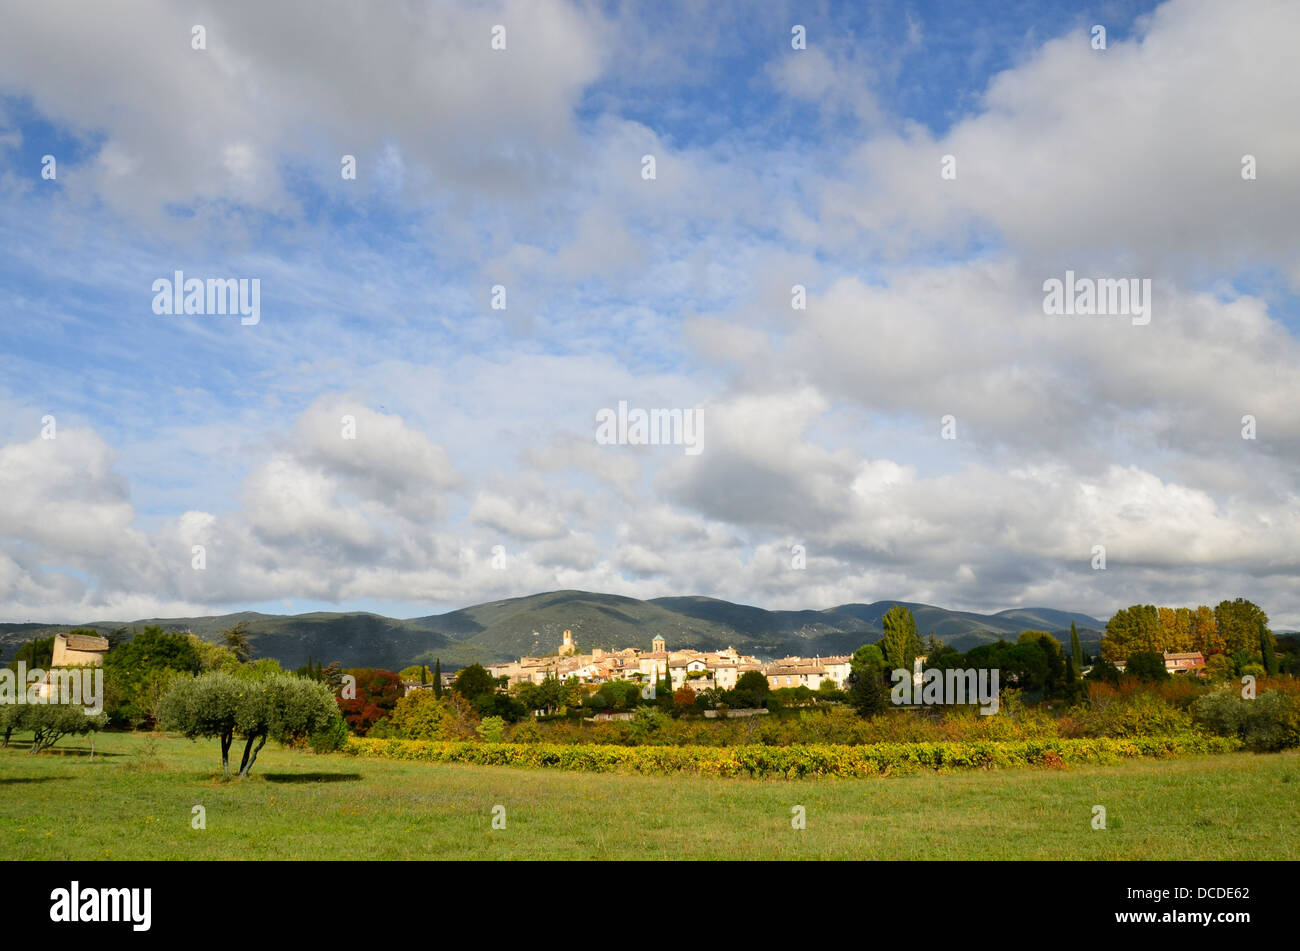 Lourmarin village in the Luberon, situated at the foot of the Luberon, a mountain range of light and contrasts. Provence, France Stock Photo